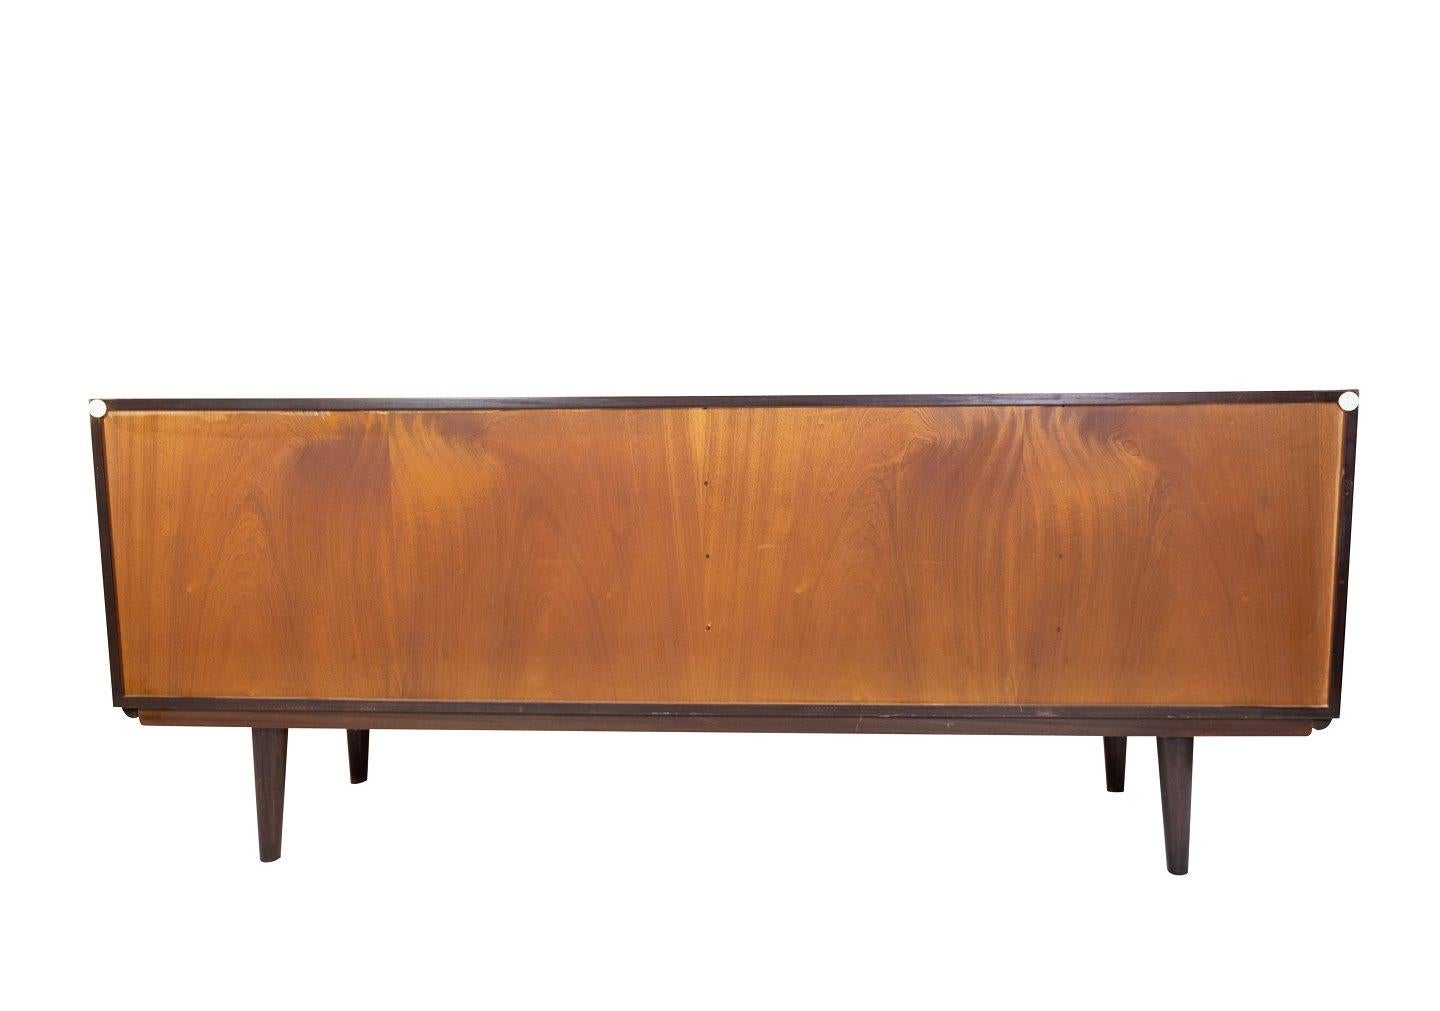 Scandinavian Modern Sideboard in Rosewood Designed by Omann Junior from the 1960s